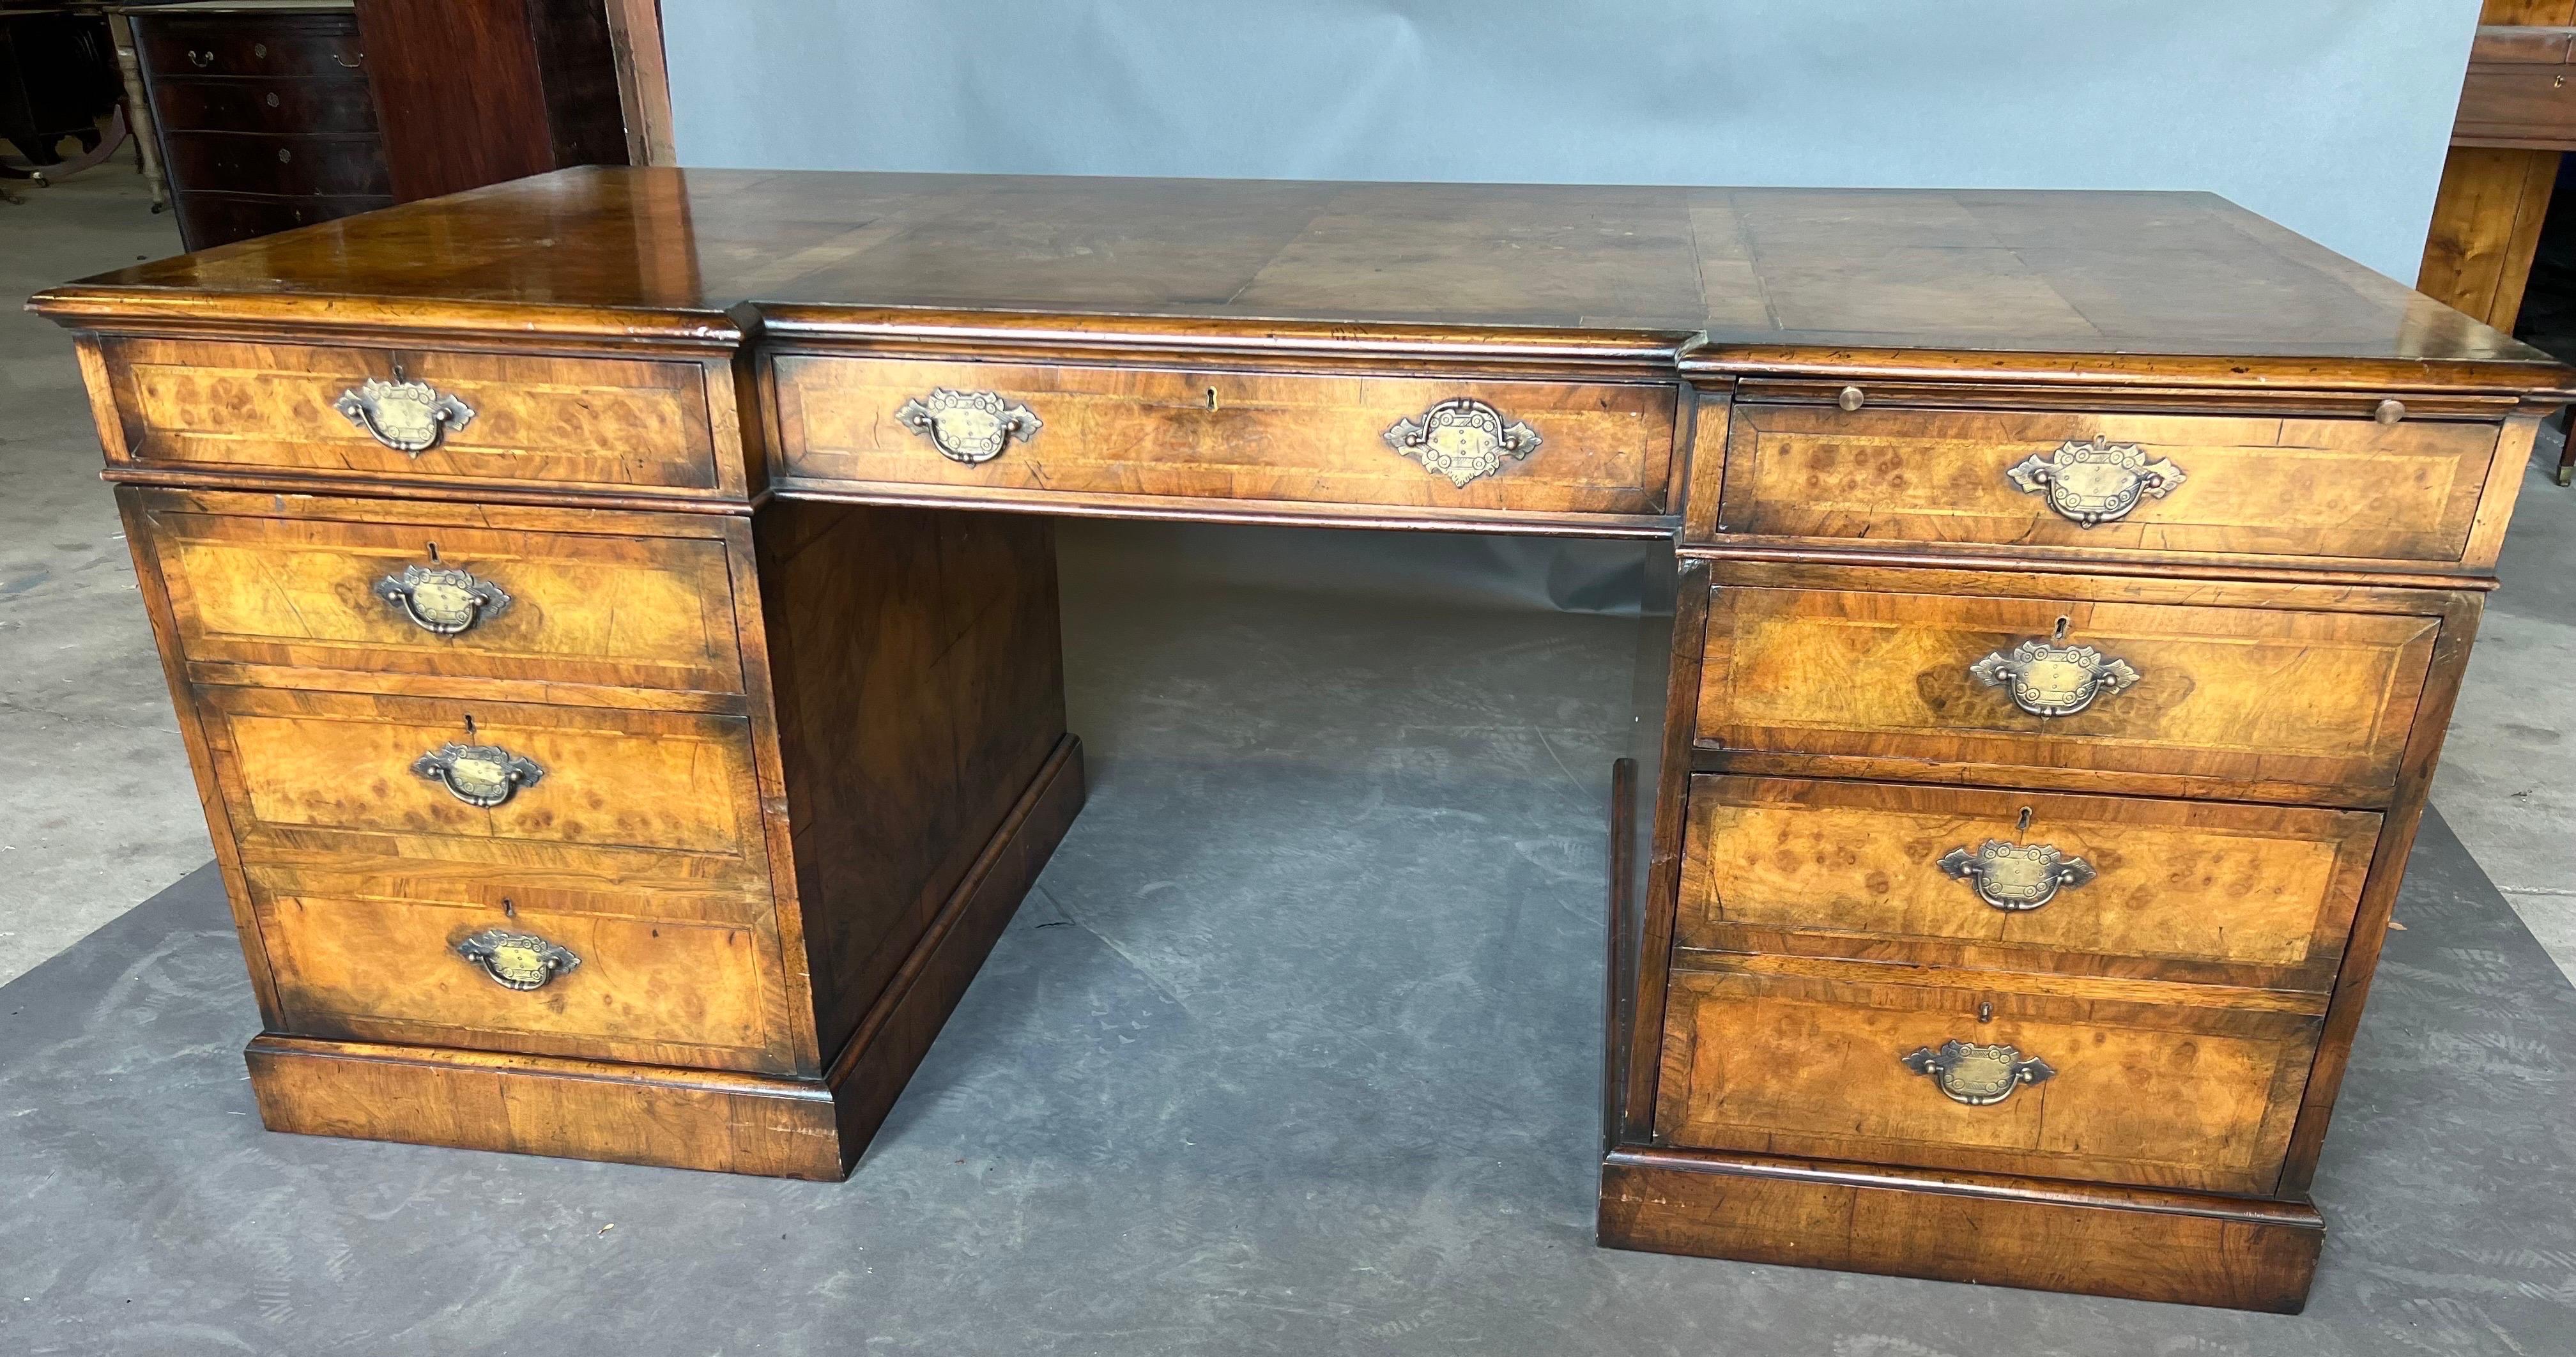 Gorgeous 19th century English burl walnut three part desk. Finished all around with faux drawers on the opposite side and pull out writing slide that would work very well for a laptop computer.  Very handsome piece. 